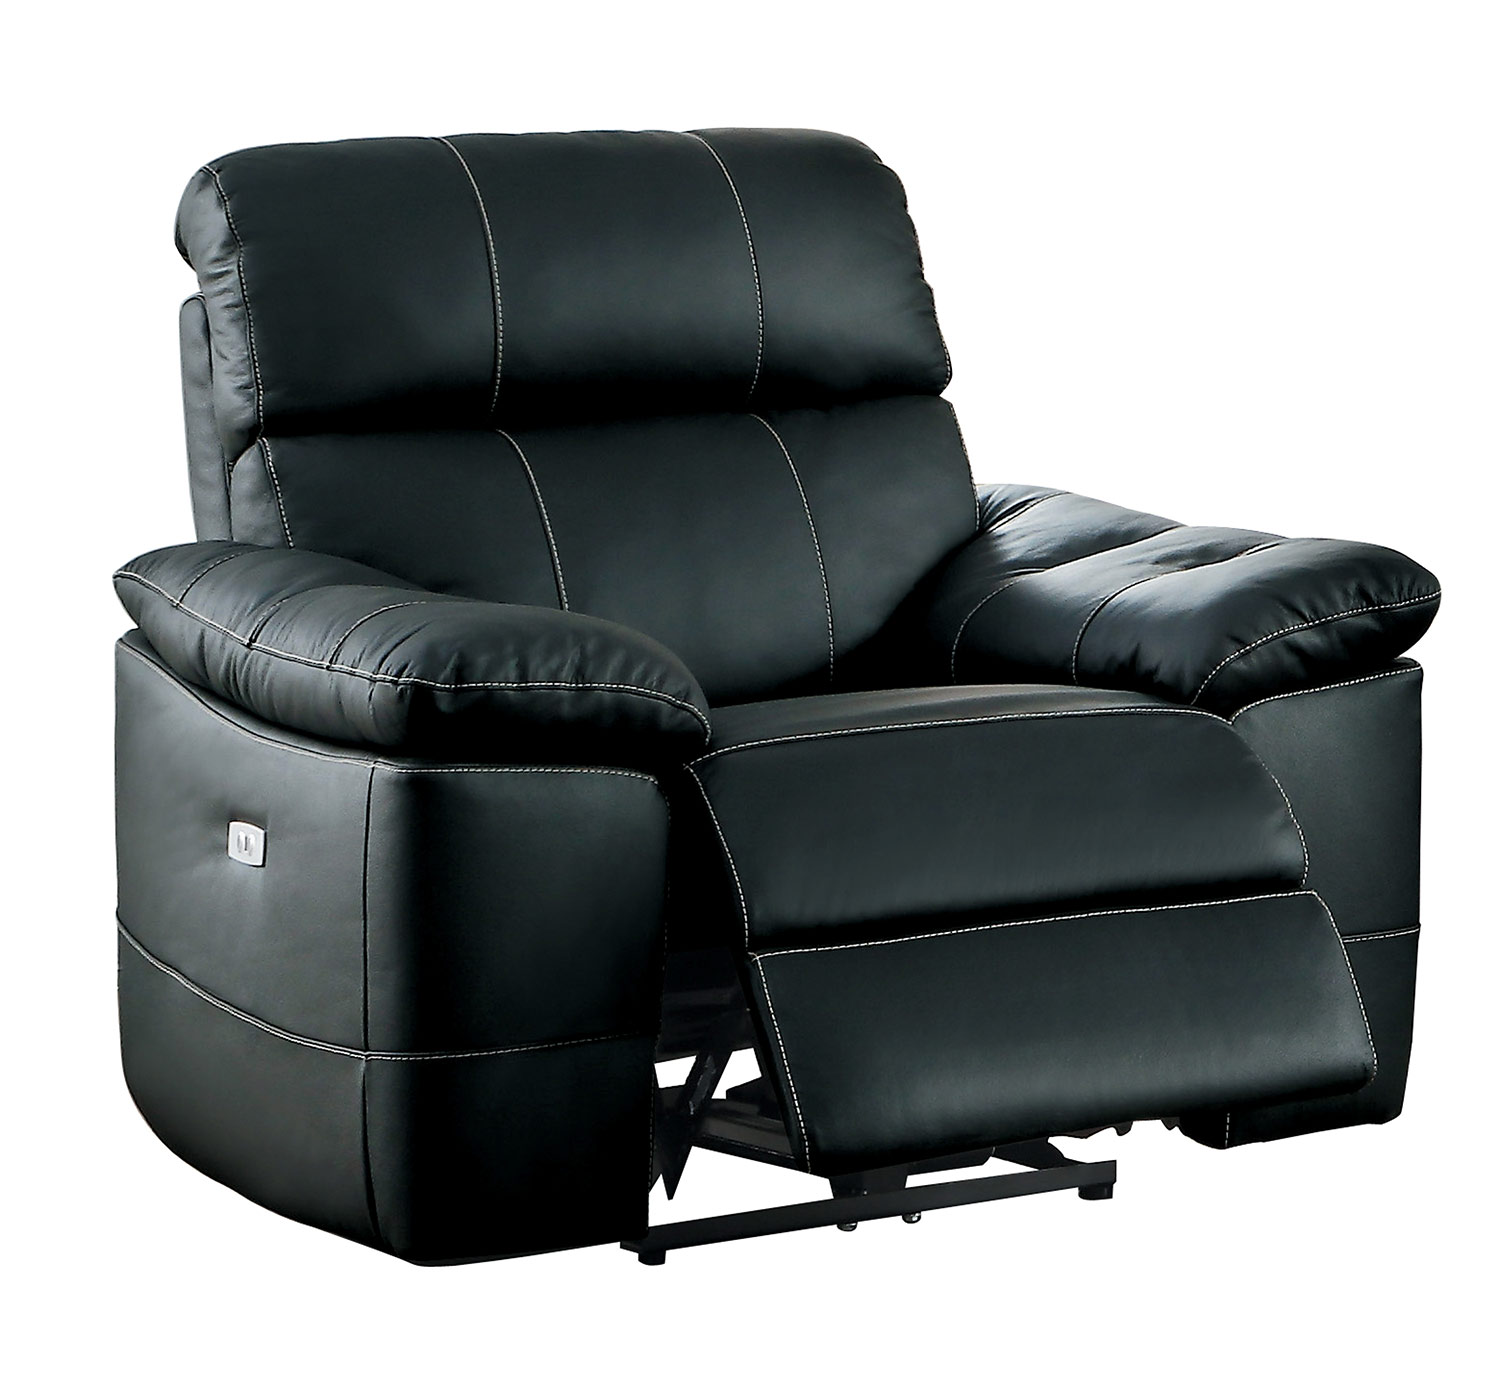 Homelegance Nicasio Power Reclining Chair - Black Leather